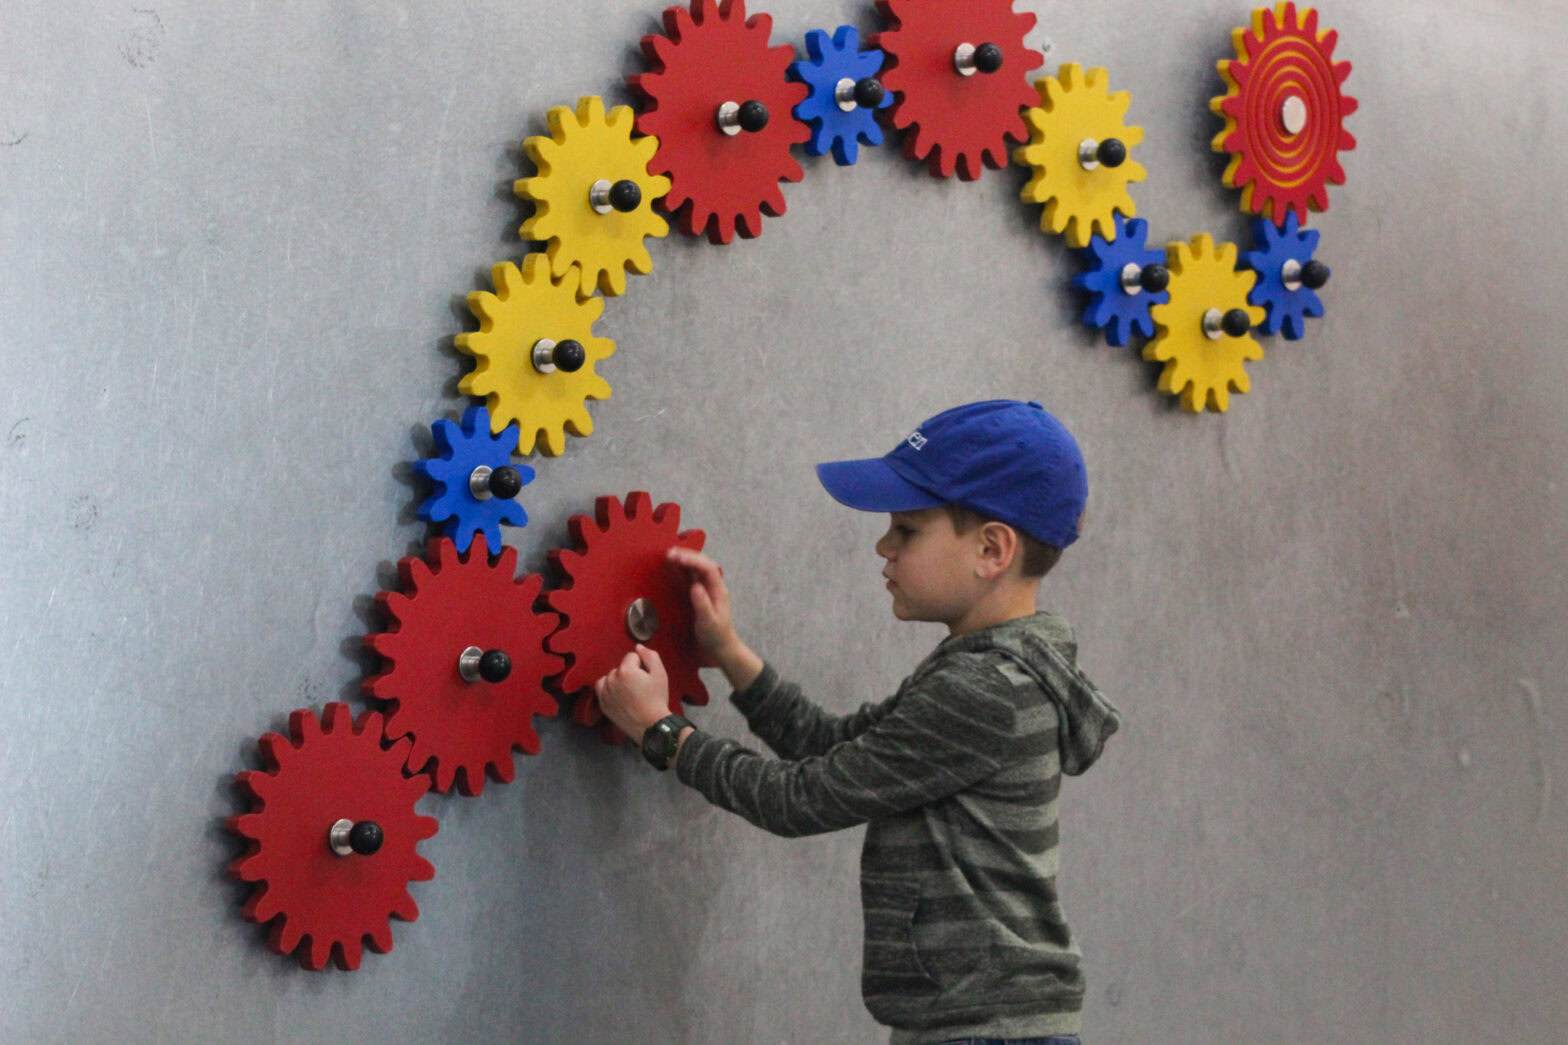 A little boy playing with toy gears on the magnet wall